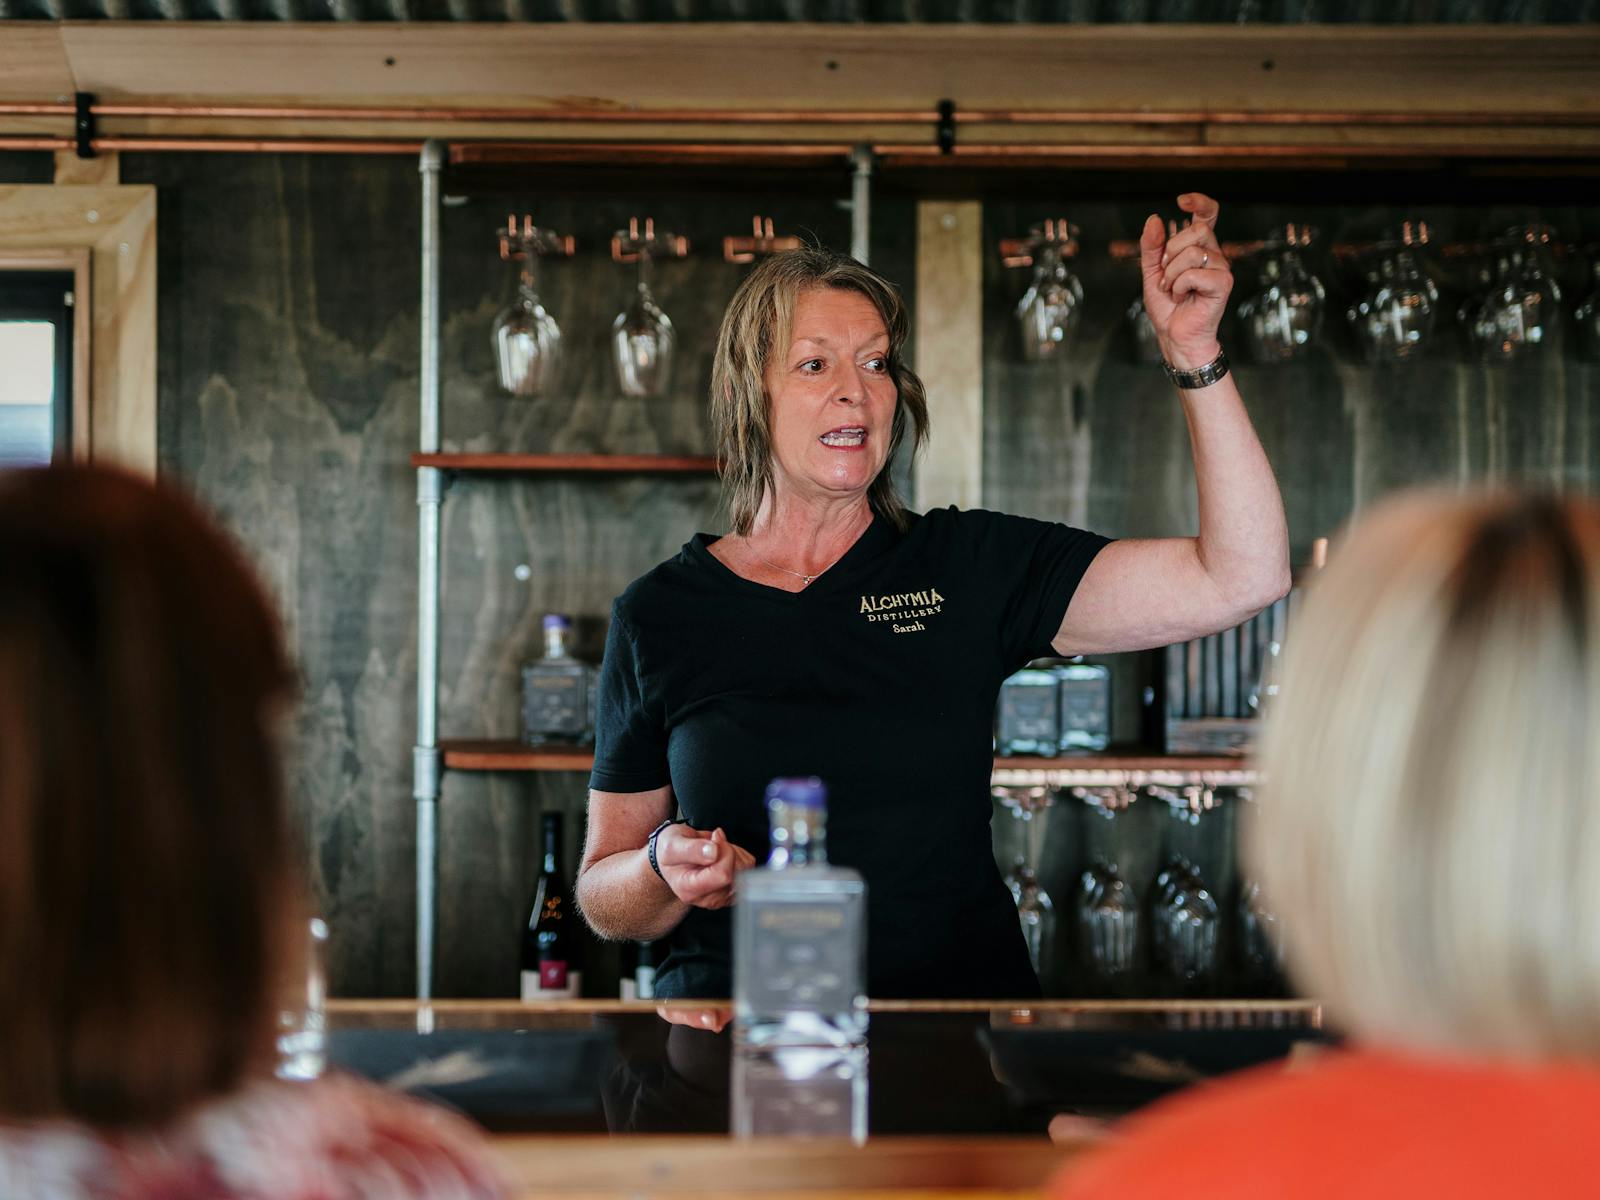 Enjoy a tasting of wither whisky, vodka or gin and listen to Sarah talk about tasting notes.